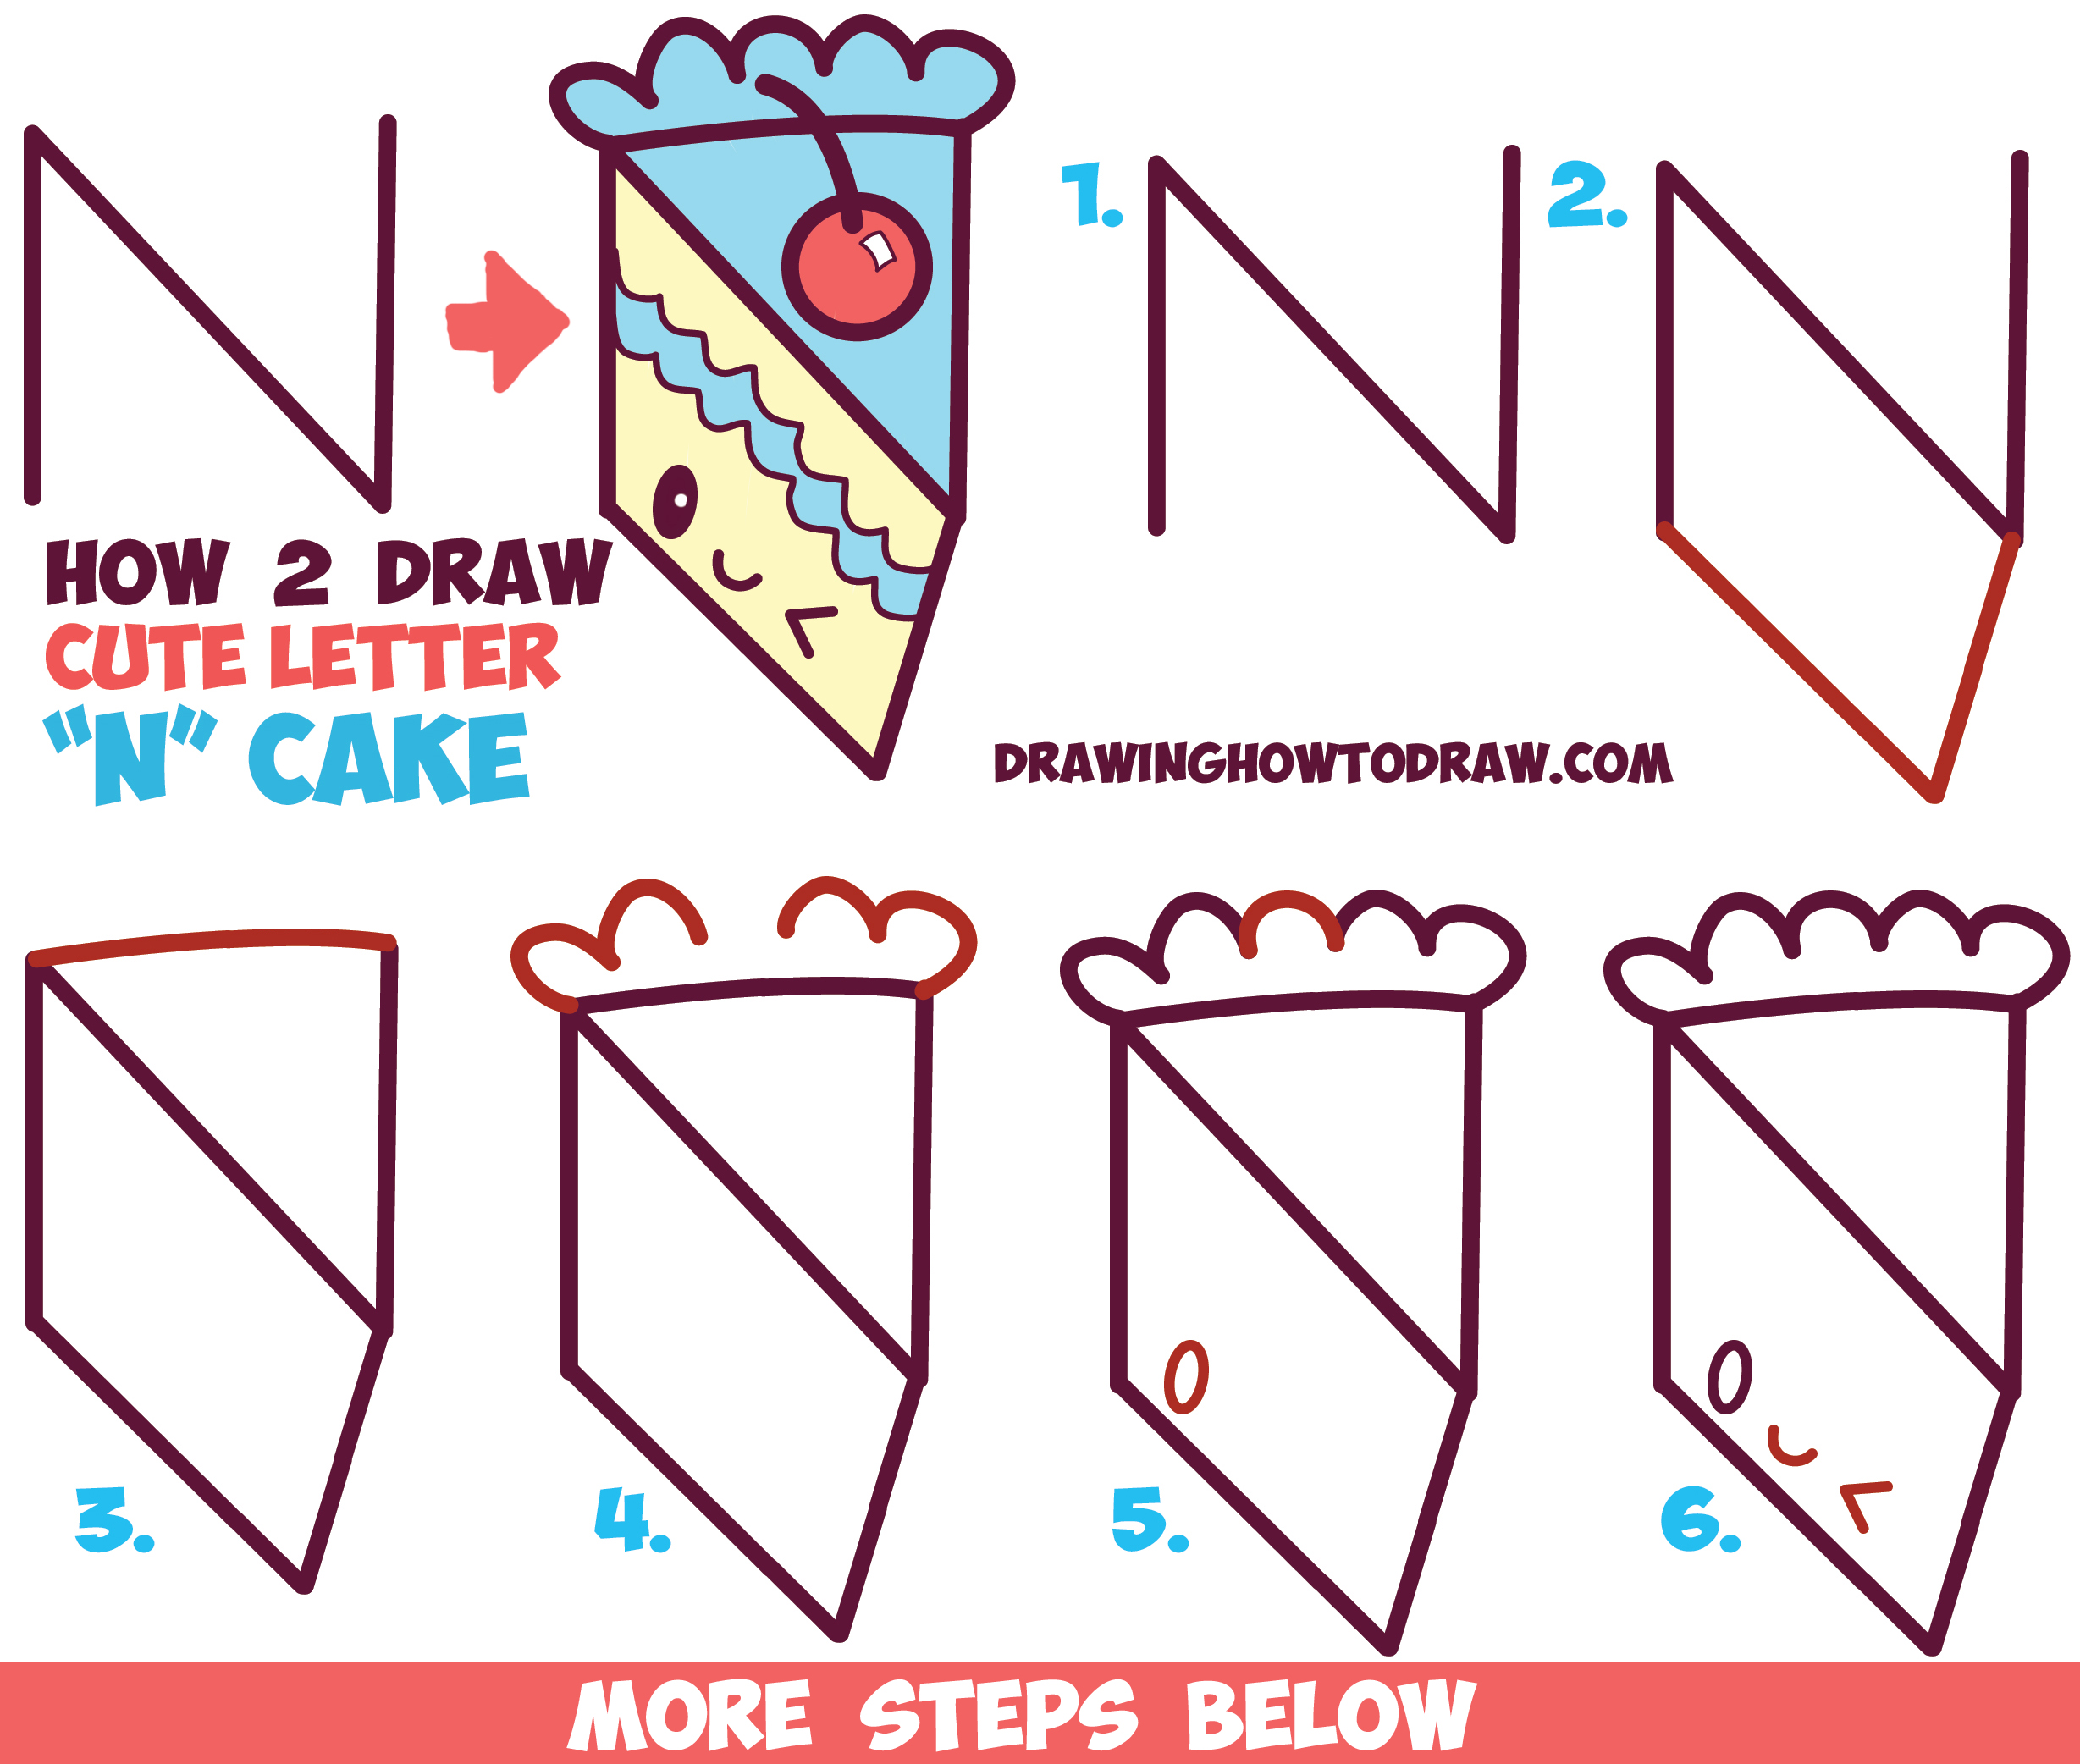 How to Draw a Cute Kawaii Piece of Cake with a Face on it from the Letter 'N' Easy Step by Step Drawing Tutorial for Kids